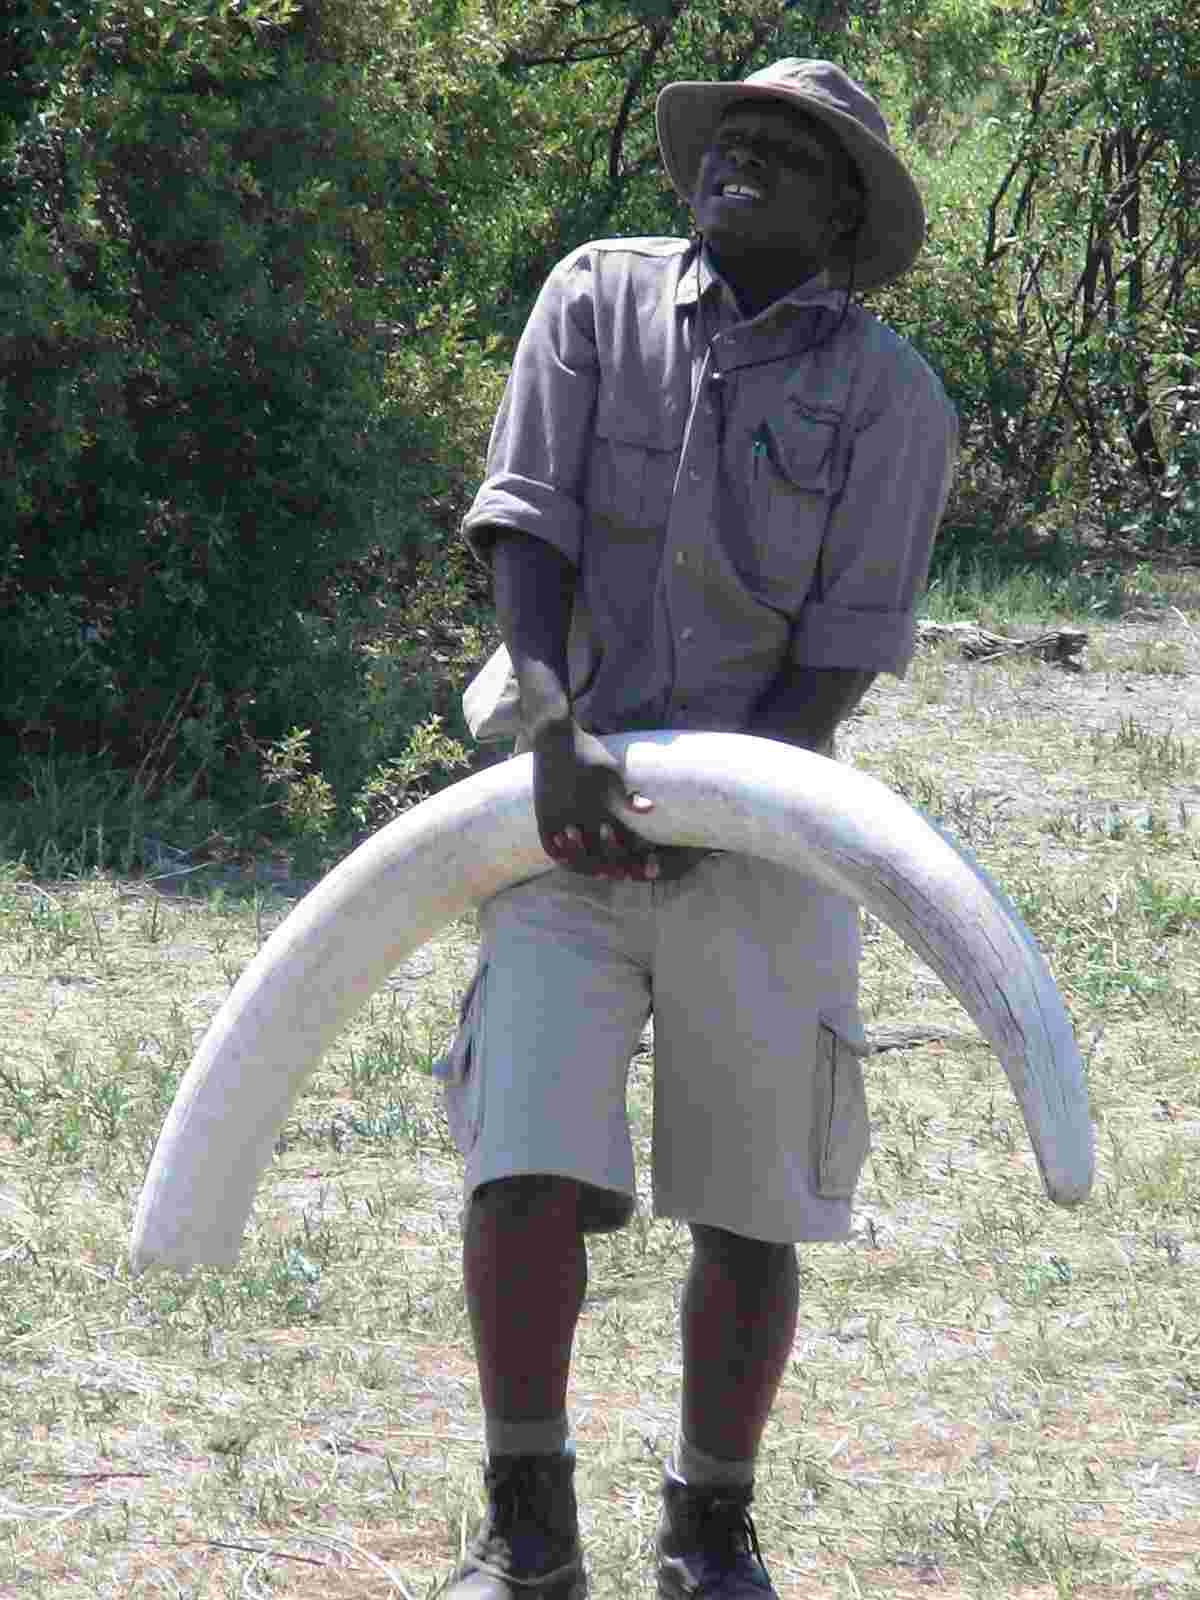 Our guide, Ronald, shows us one of the tusks from an elephant that probably died from old age.  Photo by FG.